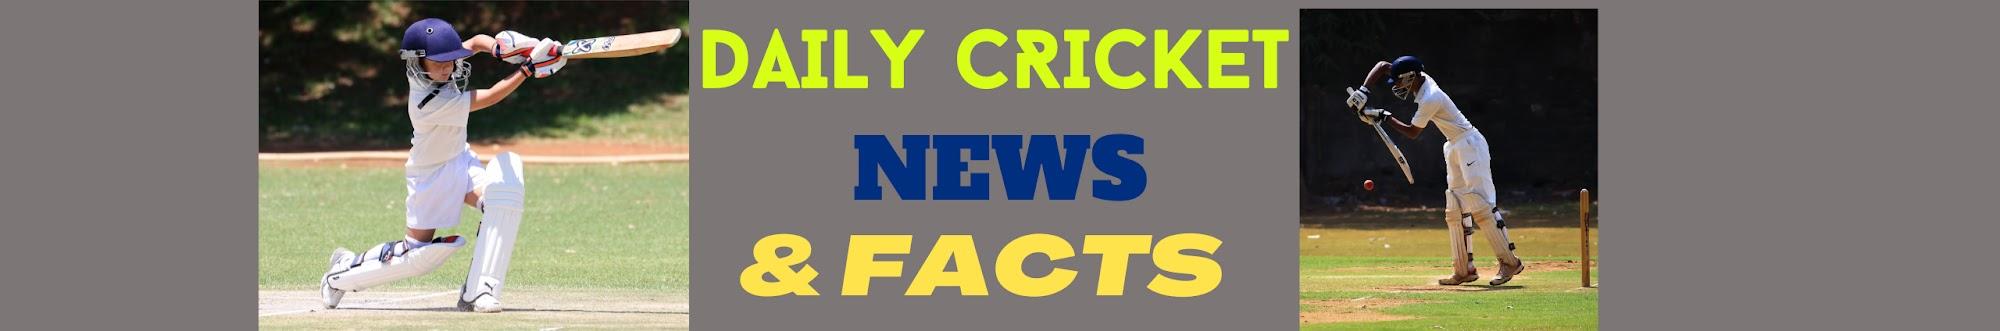 DAILY CRICKET NEWS & FACTS